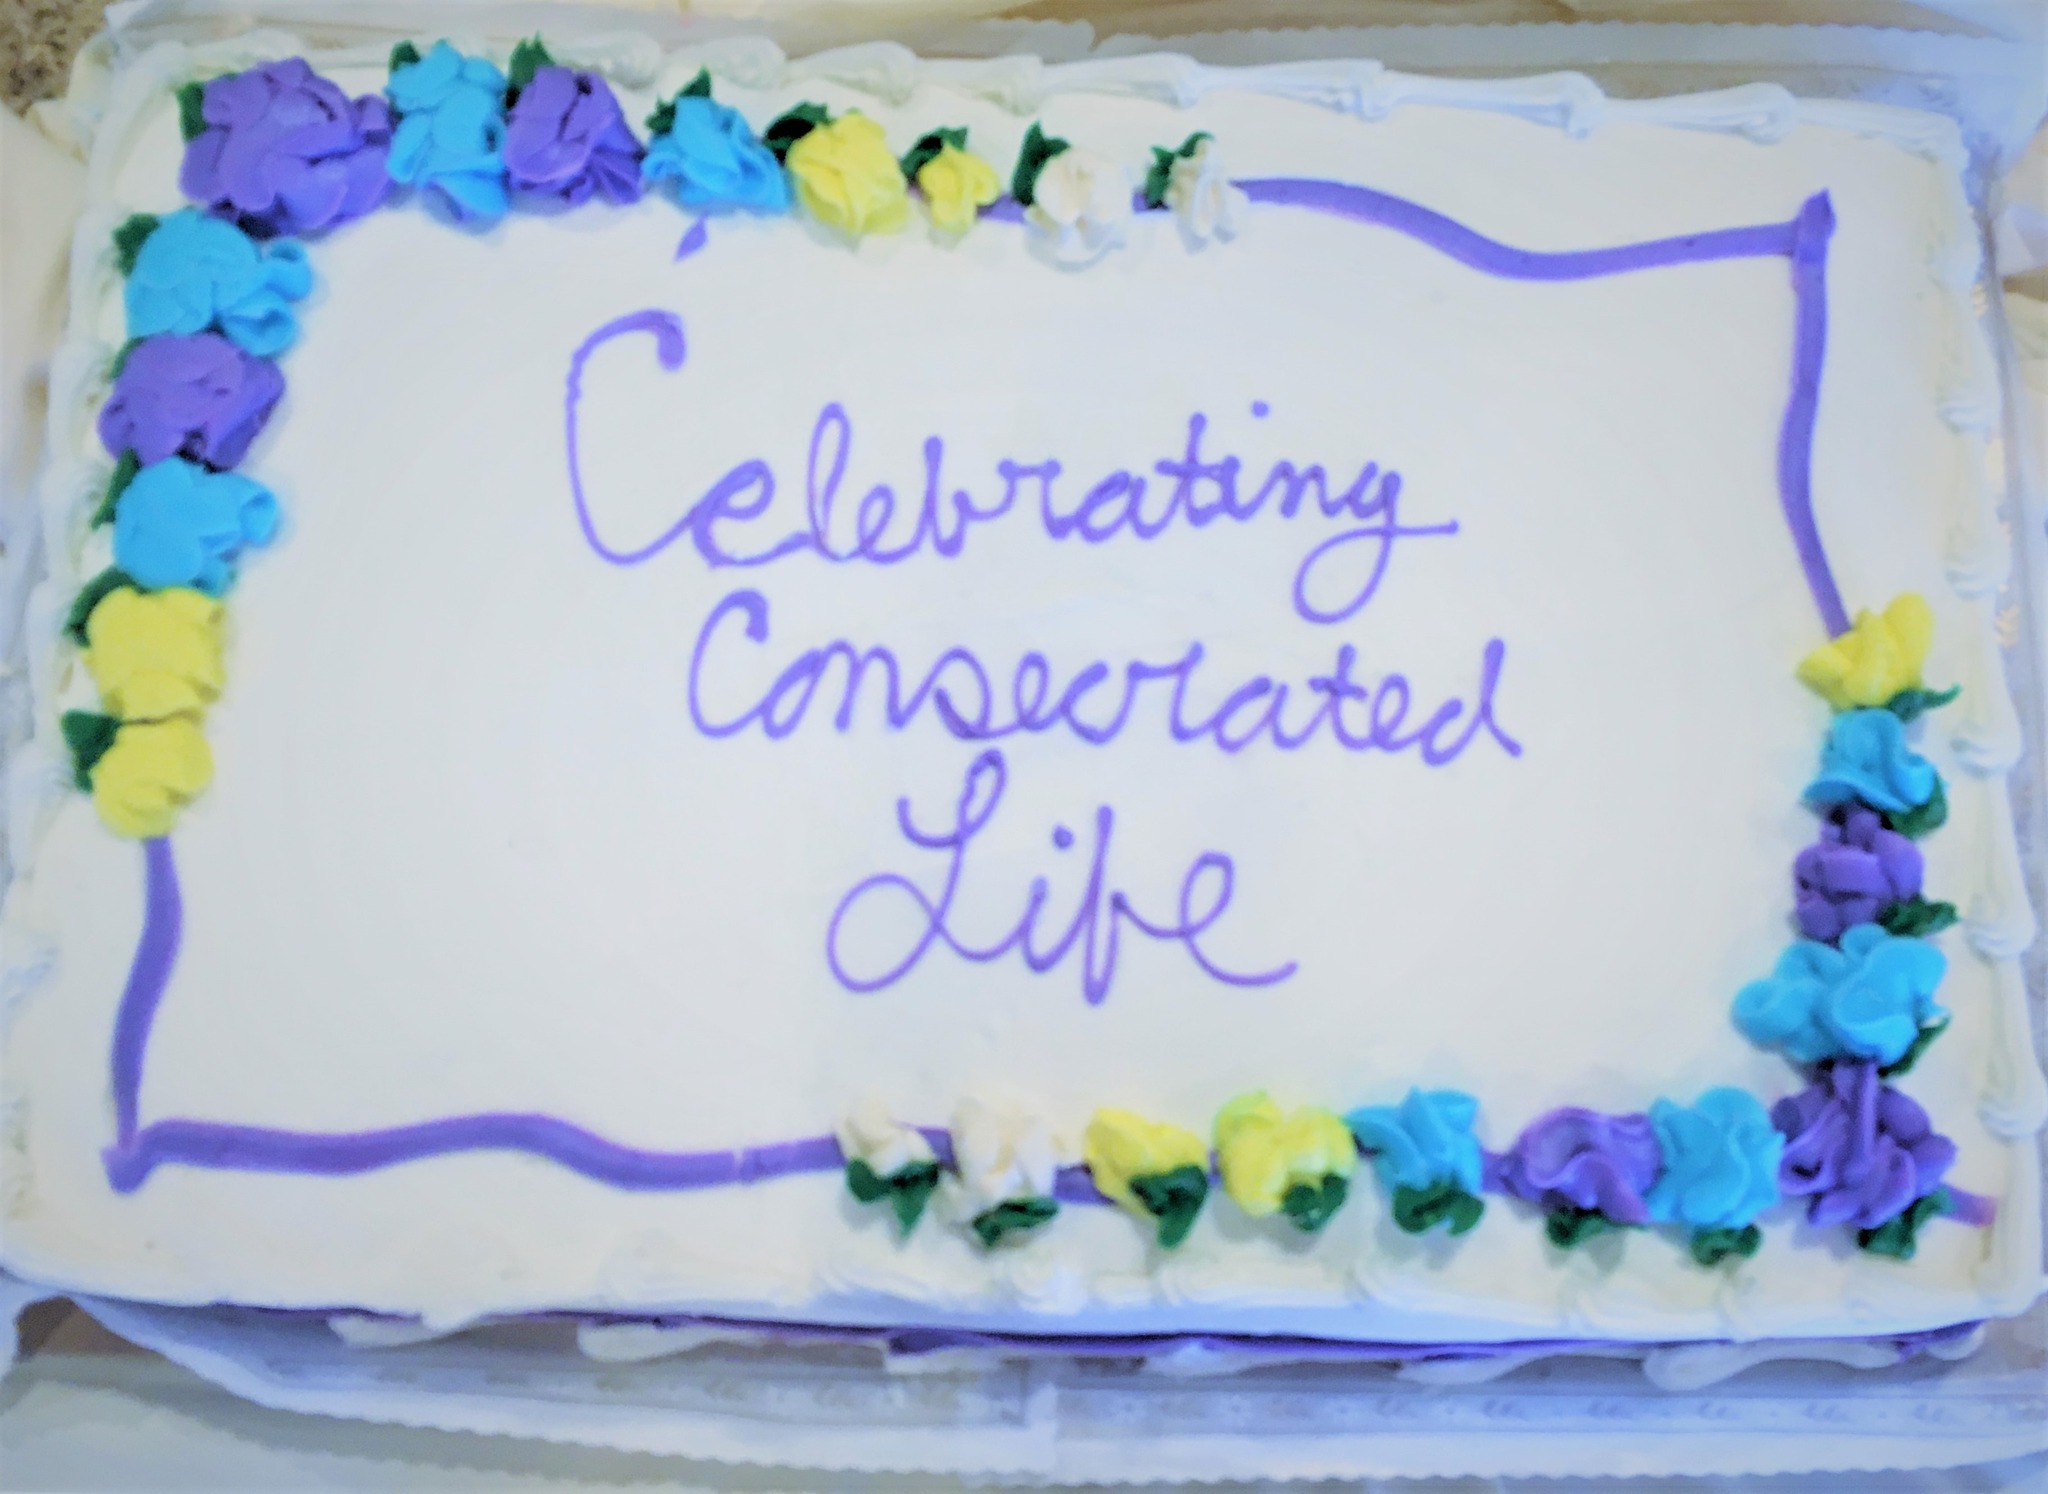 Cake Celebrating Consecrated Life